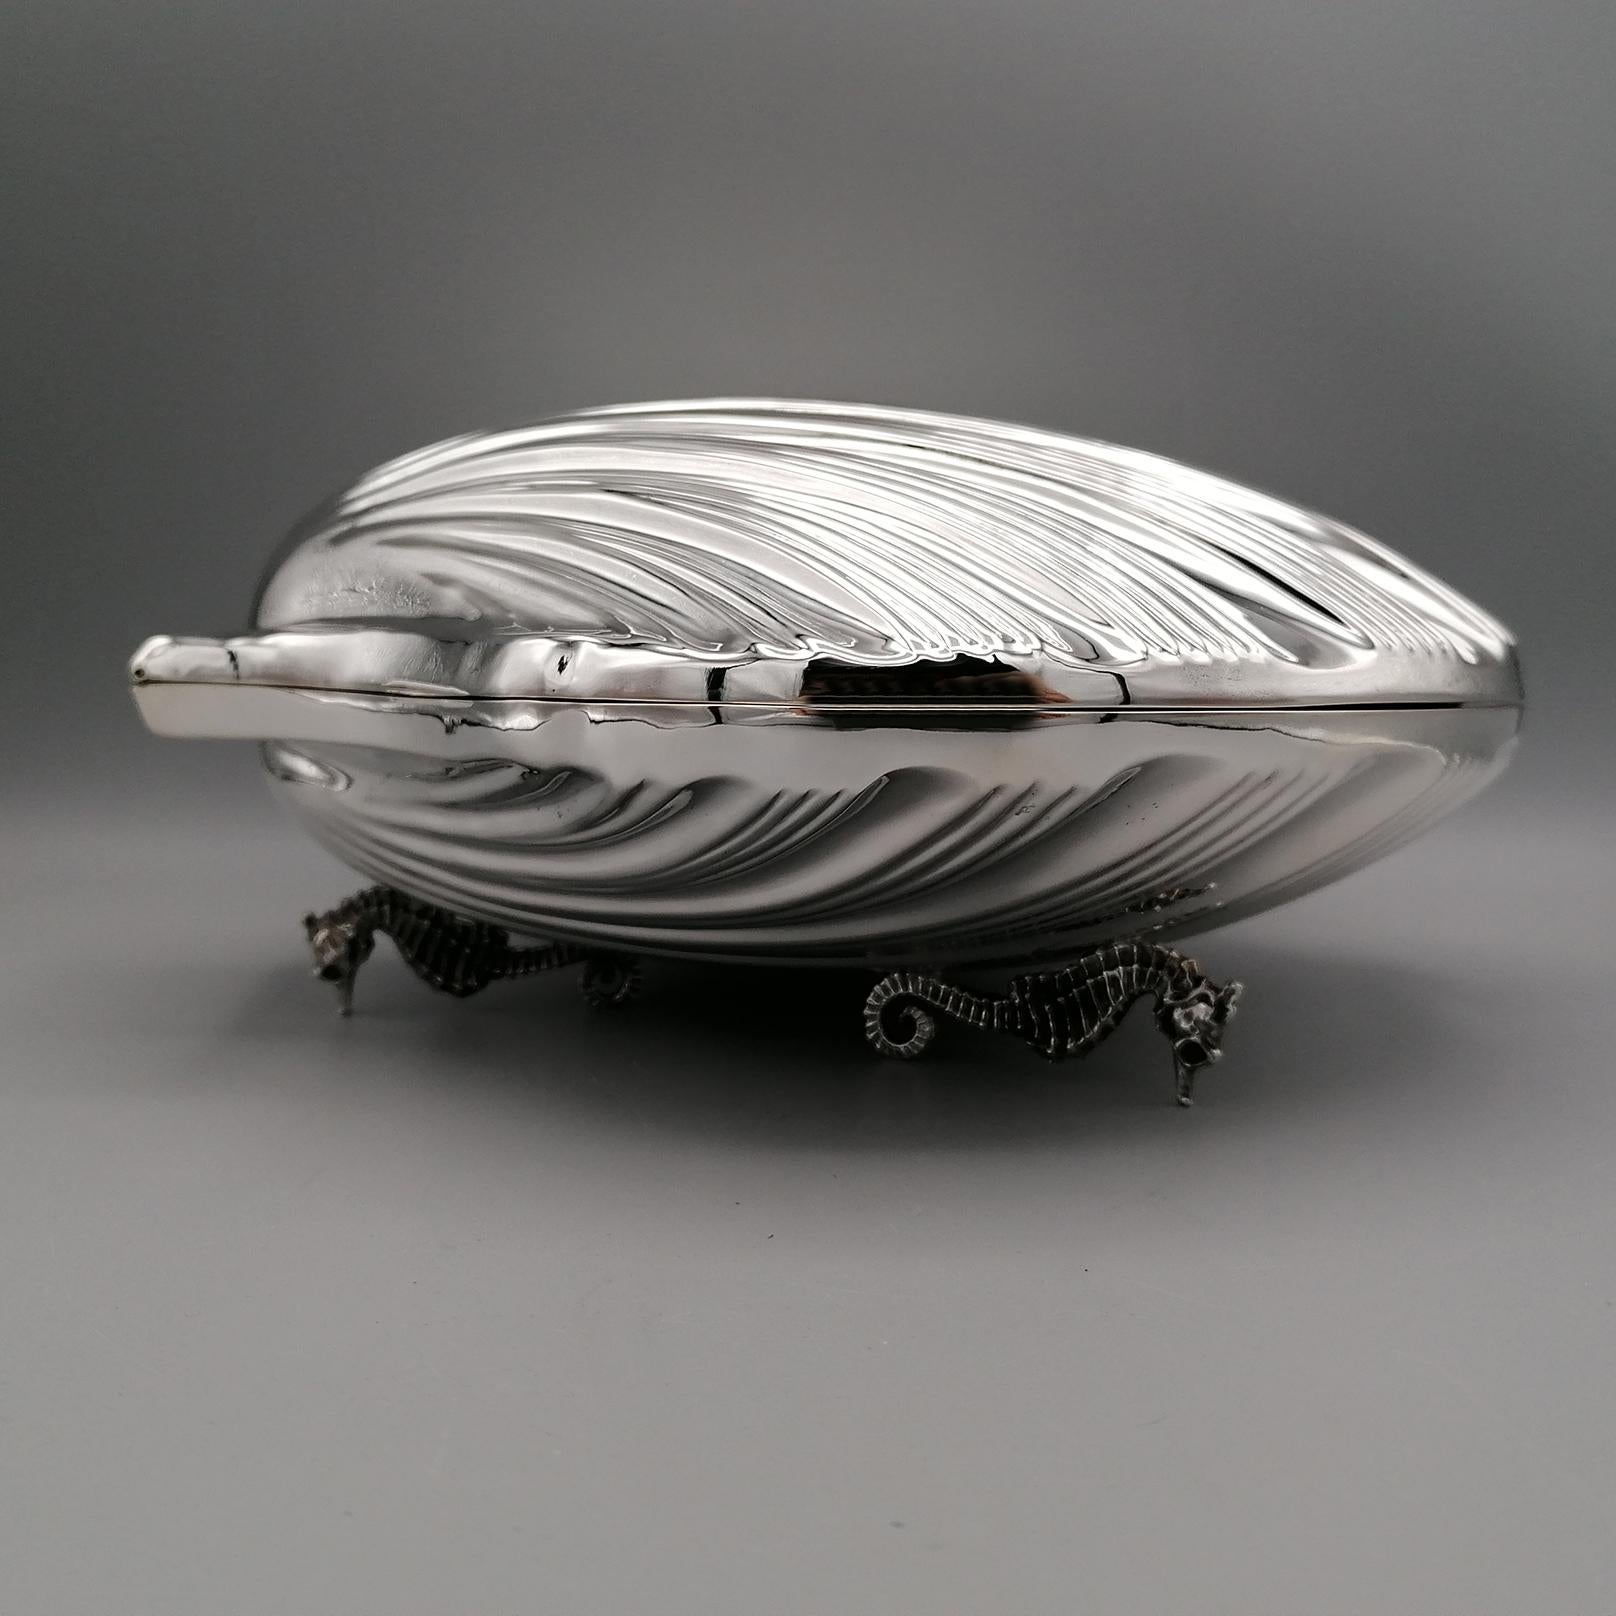 Embossed 20th Century Italian Silver Boxes Shell-Shaped on feet with gilted interior For Sale